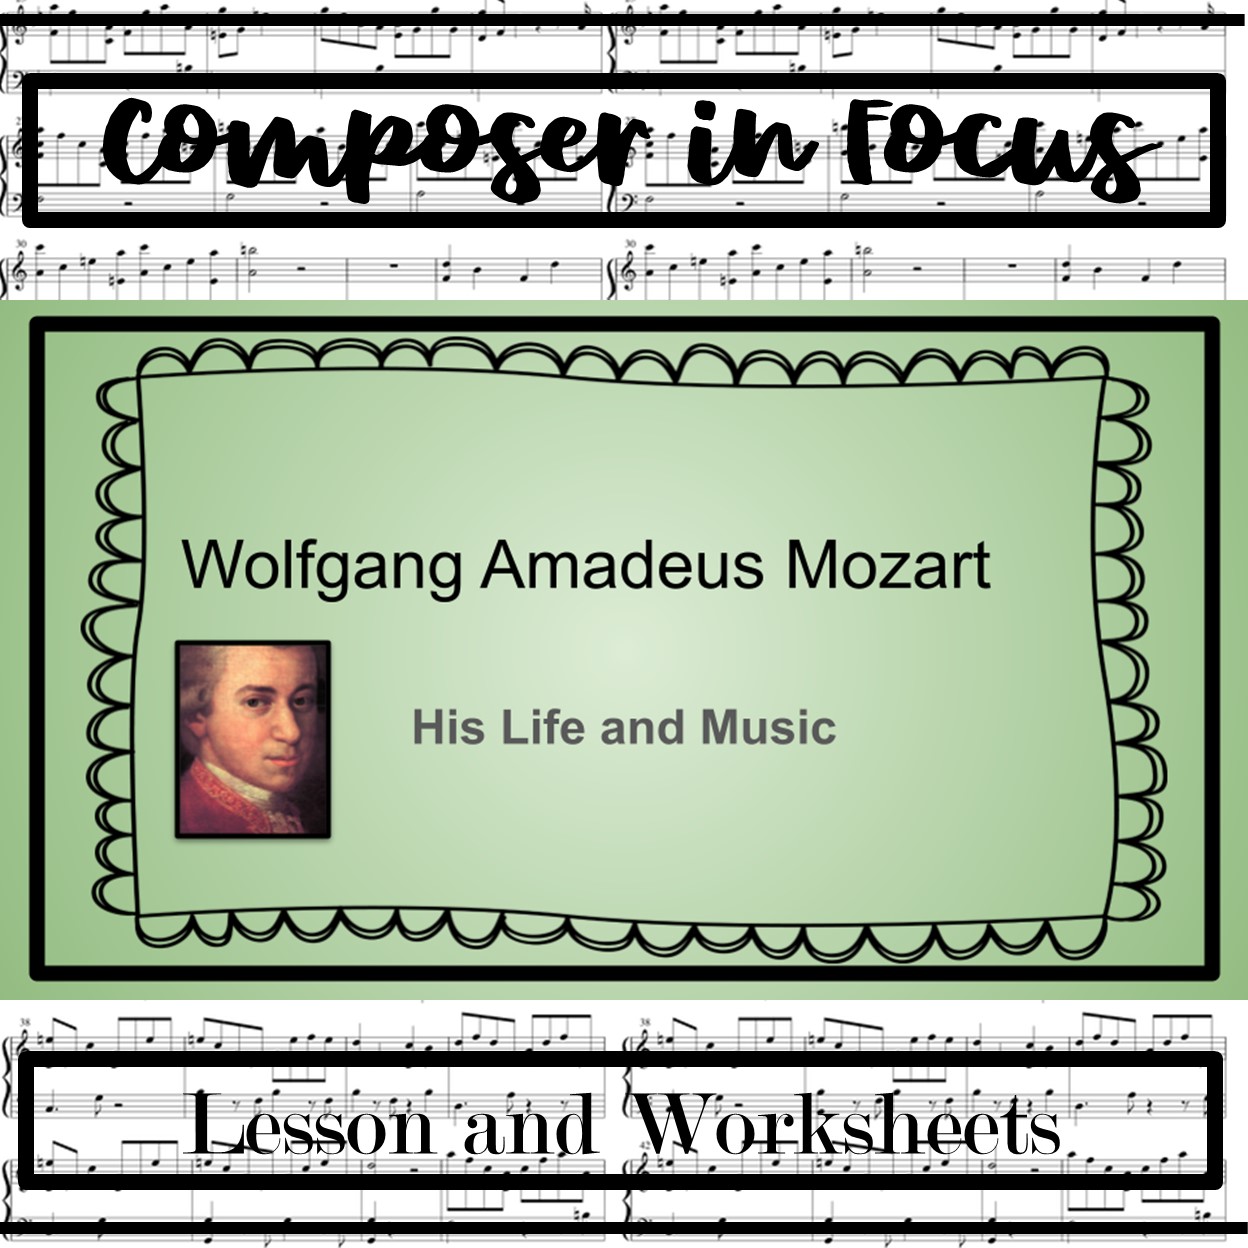 Composer in Focus - An introduction to Mozart (Google Slides) - Classful